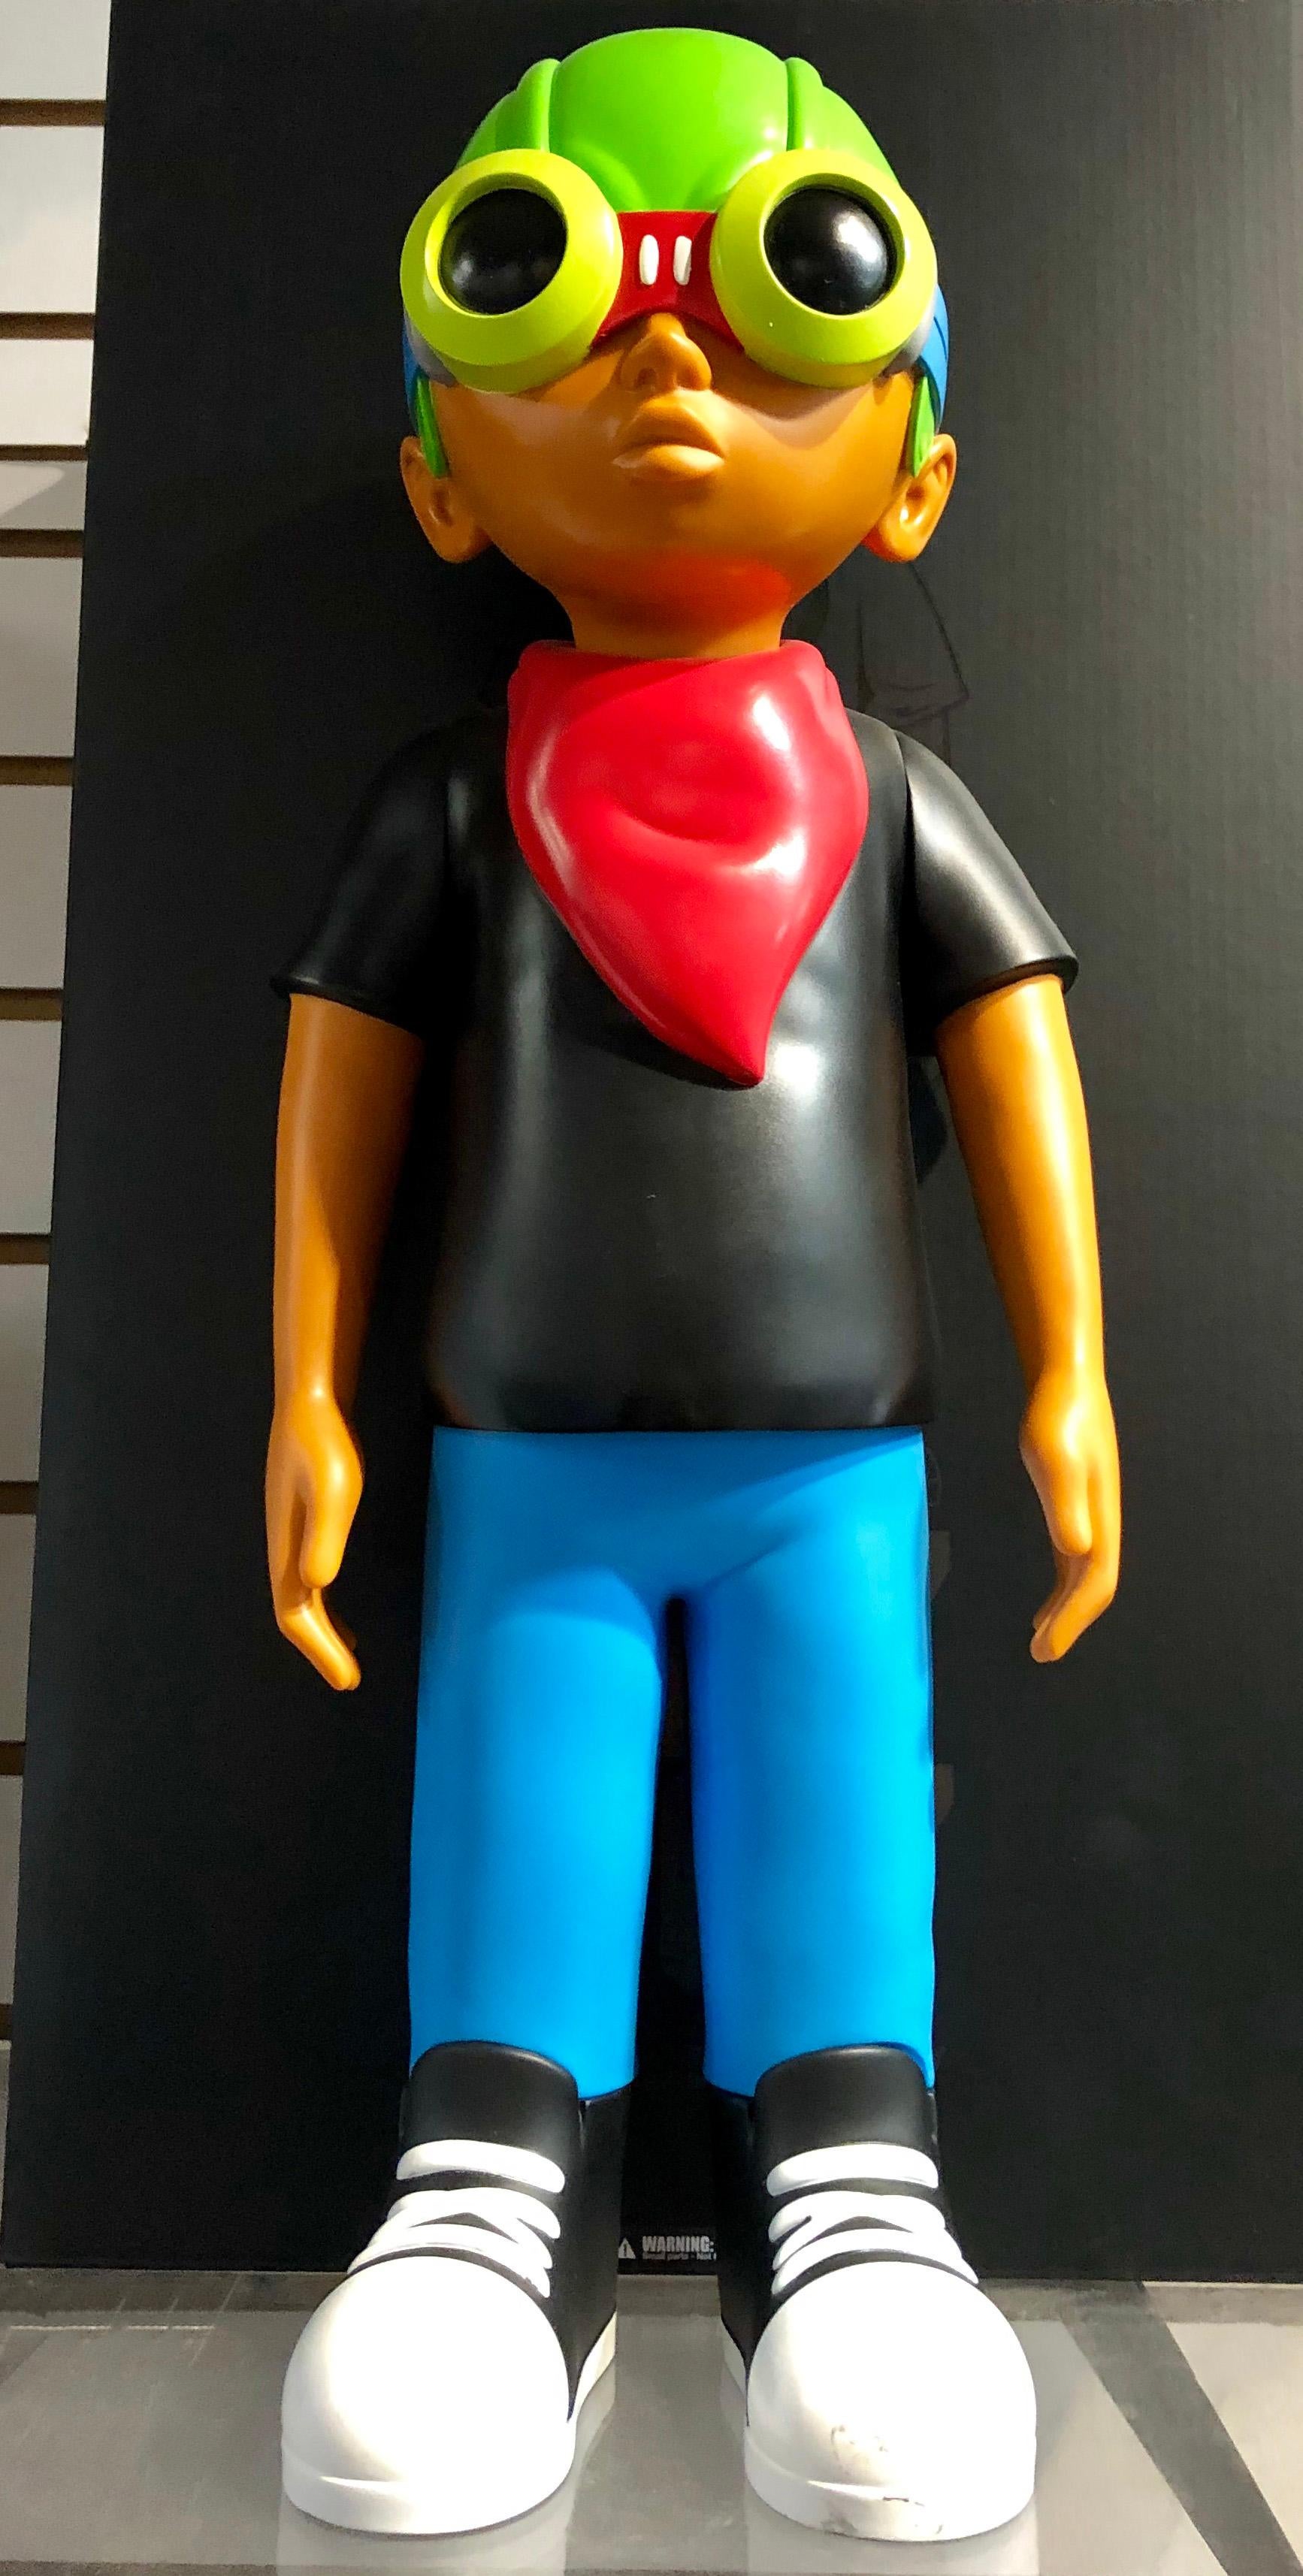 Hebru Brantley Flyboy, 2018:
A brilliant, nicely sized (18 inches tall) figurative pop art sculpture from the rising Chicago art star. 

Medium: Painted Cast Vinyl.
Dimensions: 18 x 7 x 5 inches. 
New in its original packaging.
From a sold out